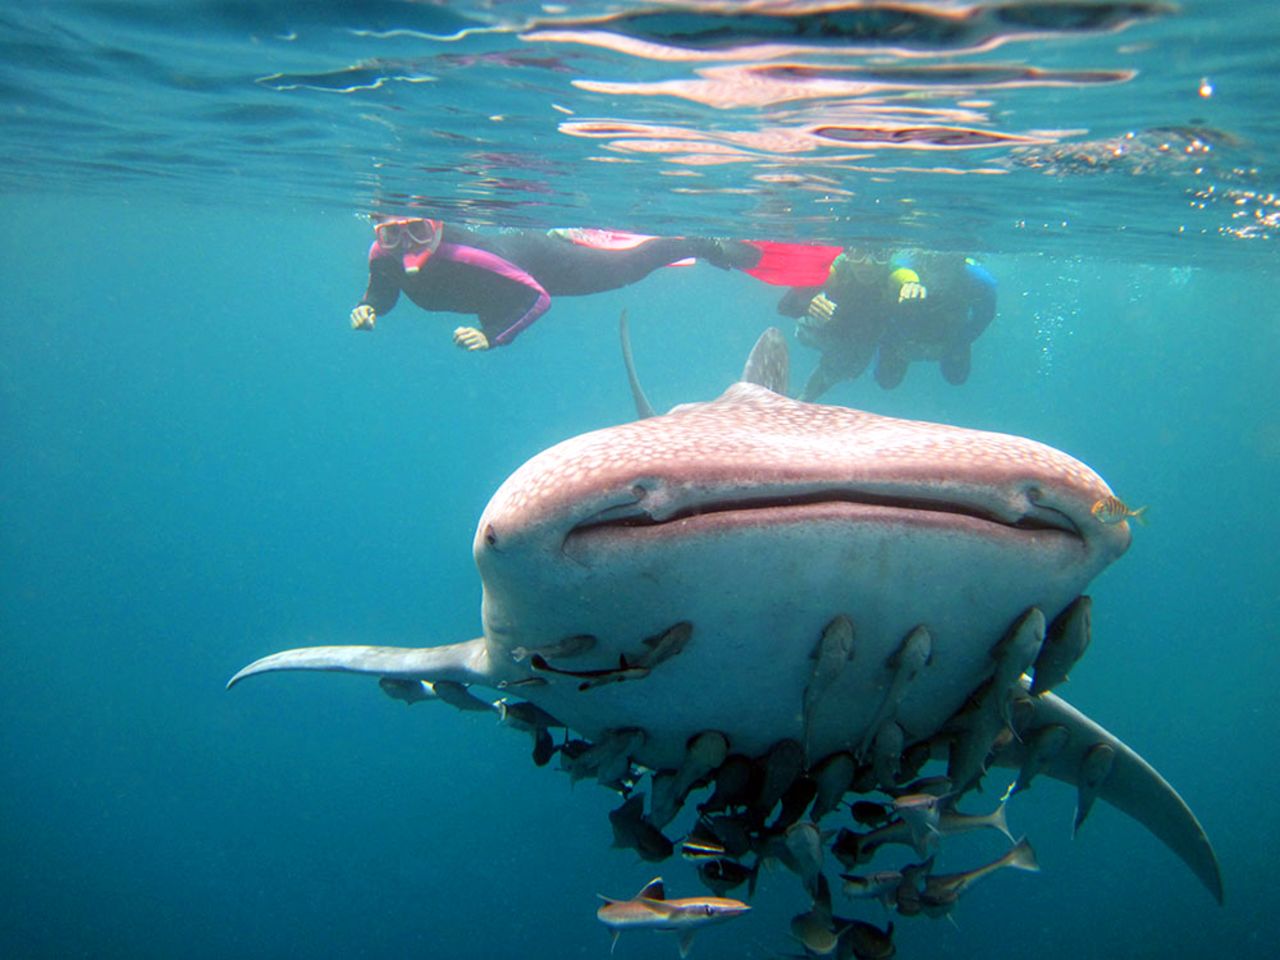 In addition to offering diverse coral reefs, the Philippines is becoming increasingly popular as a top spot to<a href="http://www.cnn.com/2015/07/05/travel/whale-shark-oslob/"> swim with whale sharks</a>.